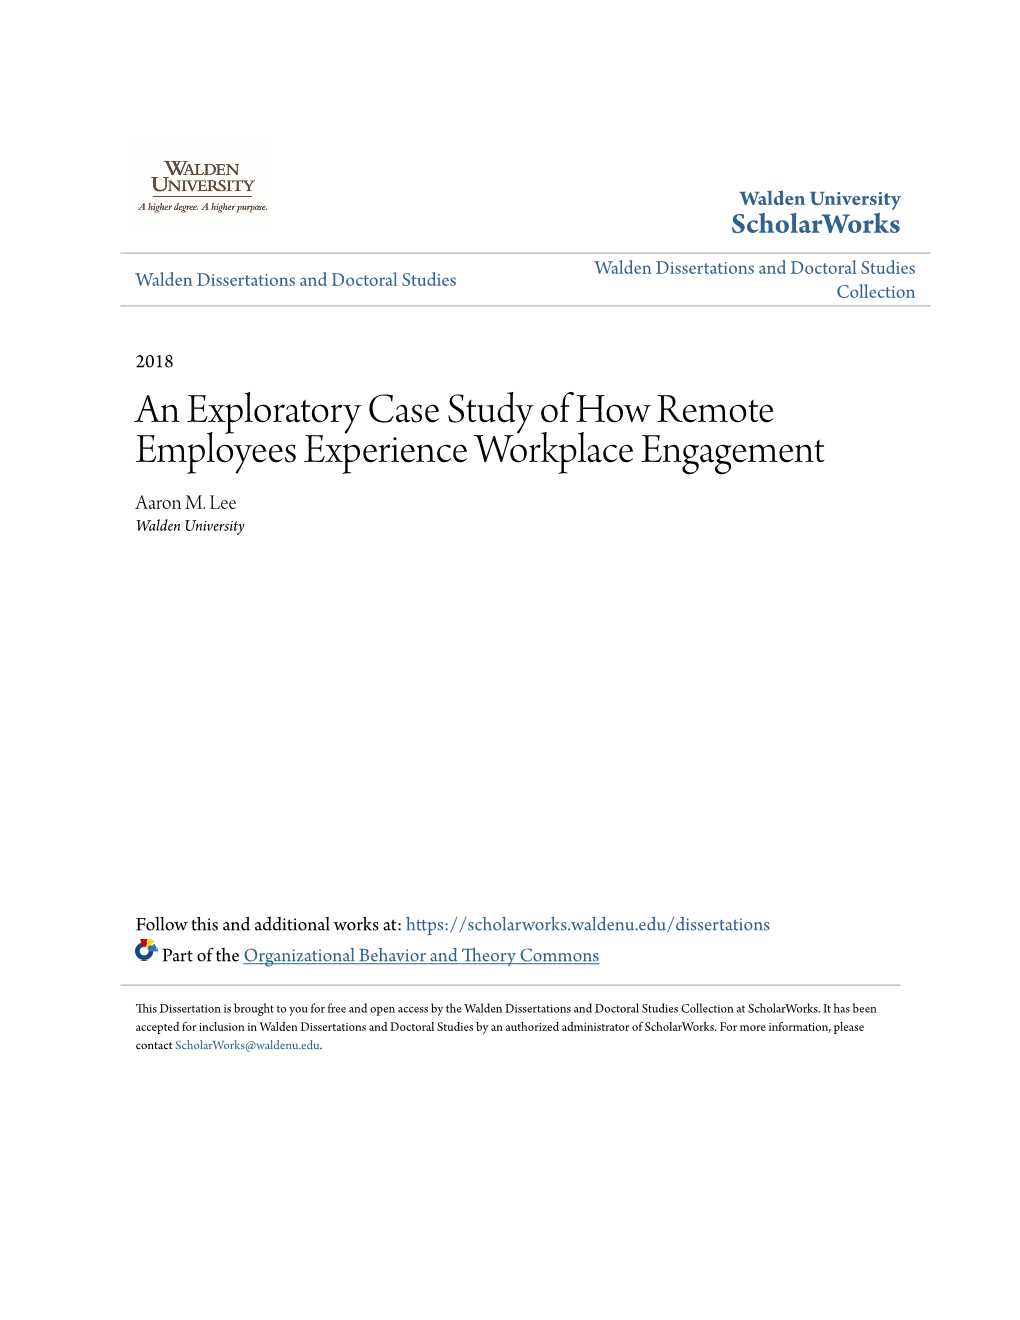 An Exploratory Case Study of How Remote Employees Experience Workplace Engagement Aaron M